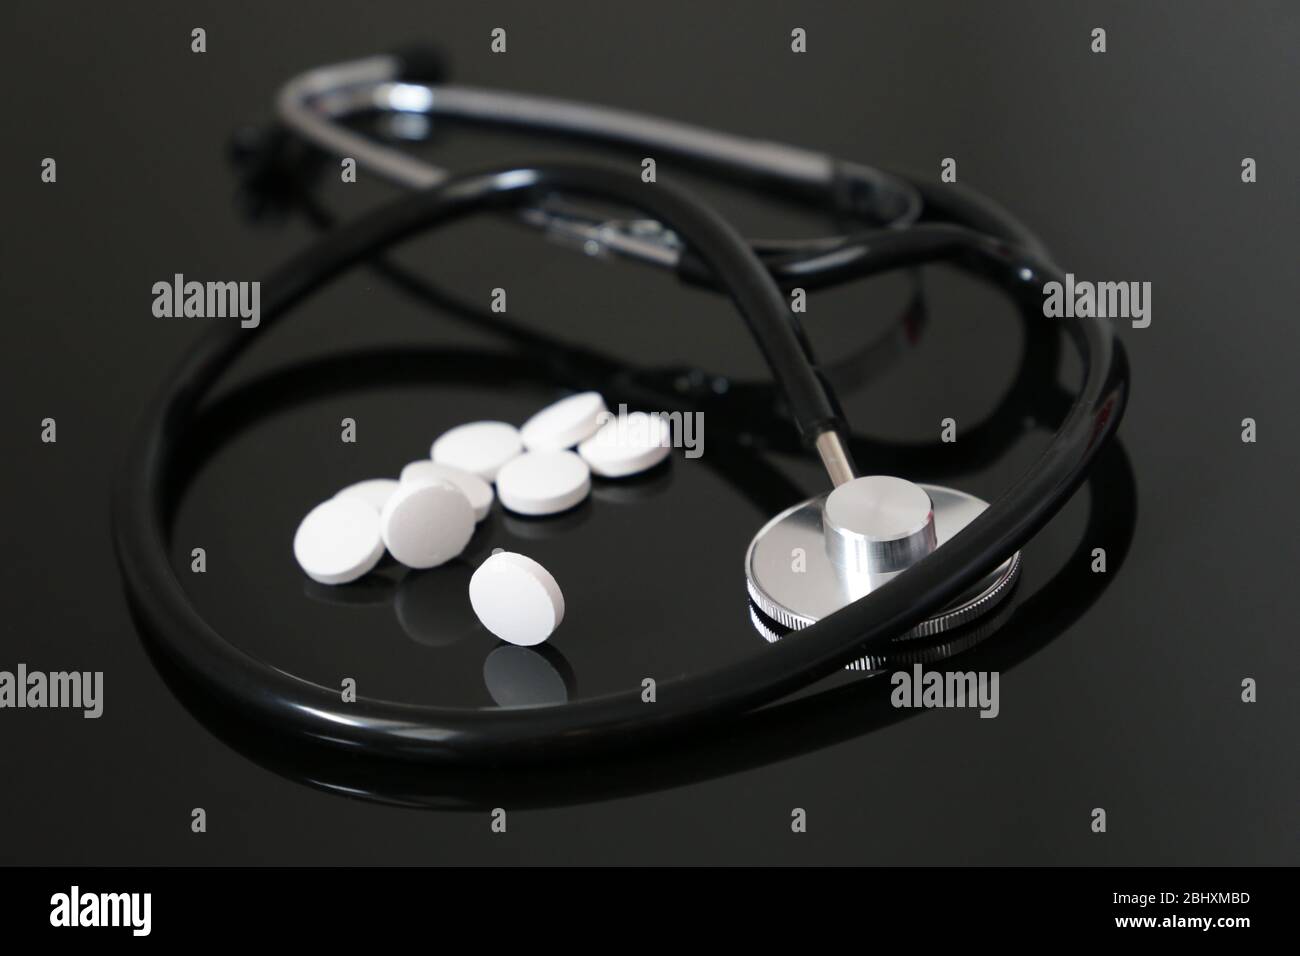 Health care and cardiology, stethoscope and white pills on dark glass table. Concept of diagnosis, treatment of heart diseases Stock Photo